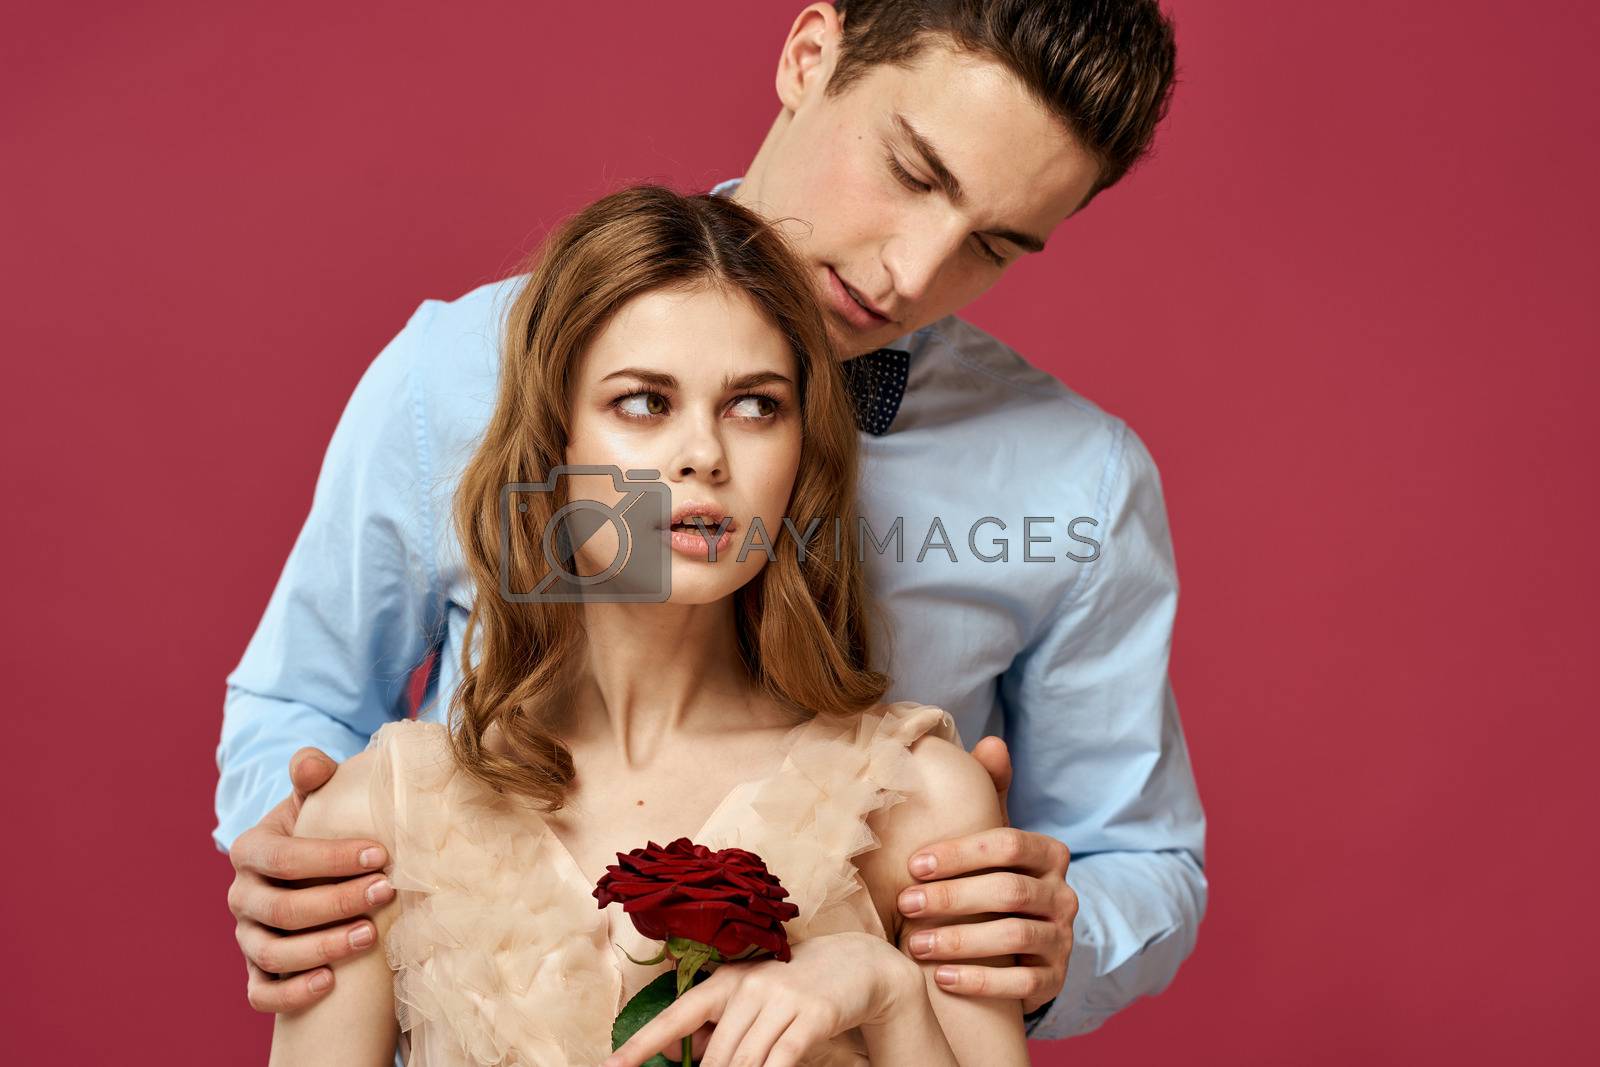 Lovers people with rose in hands on pink isolated background hug emotions happiness romance feelings. High quality photo